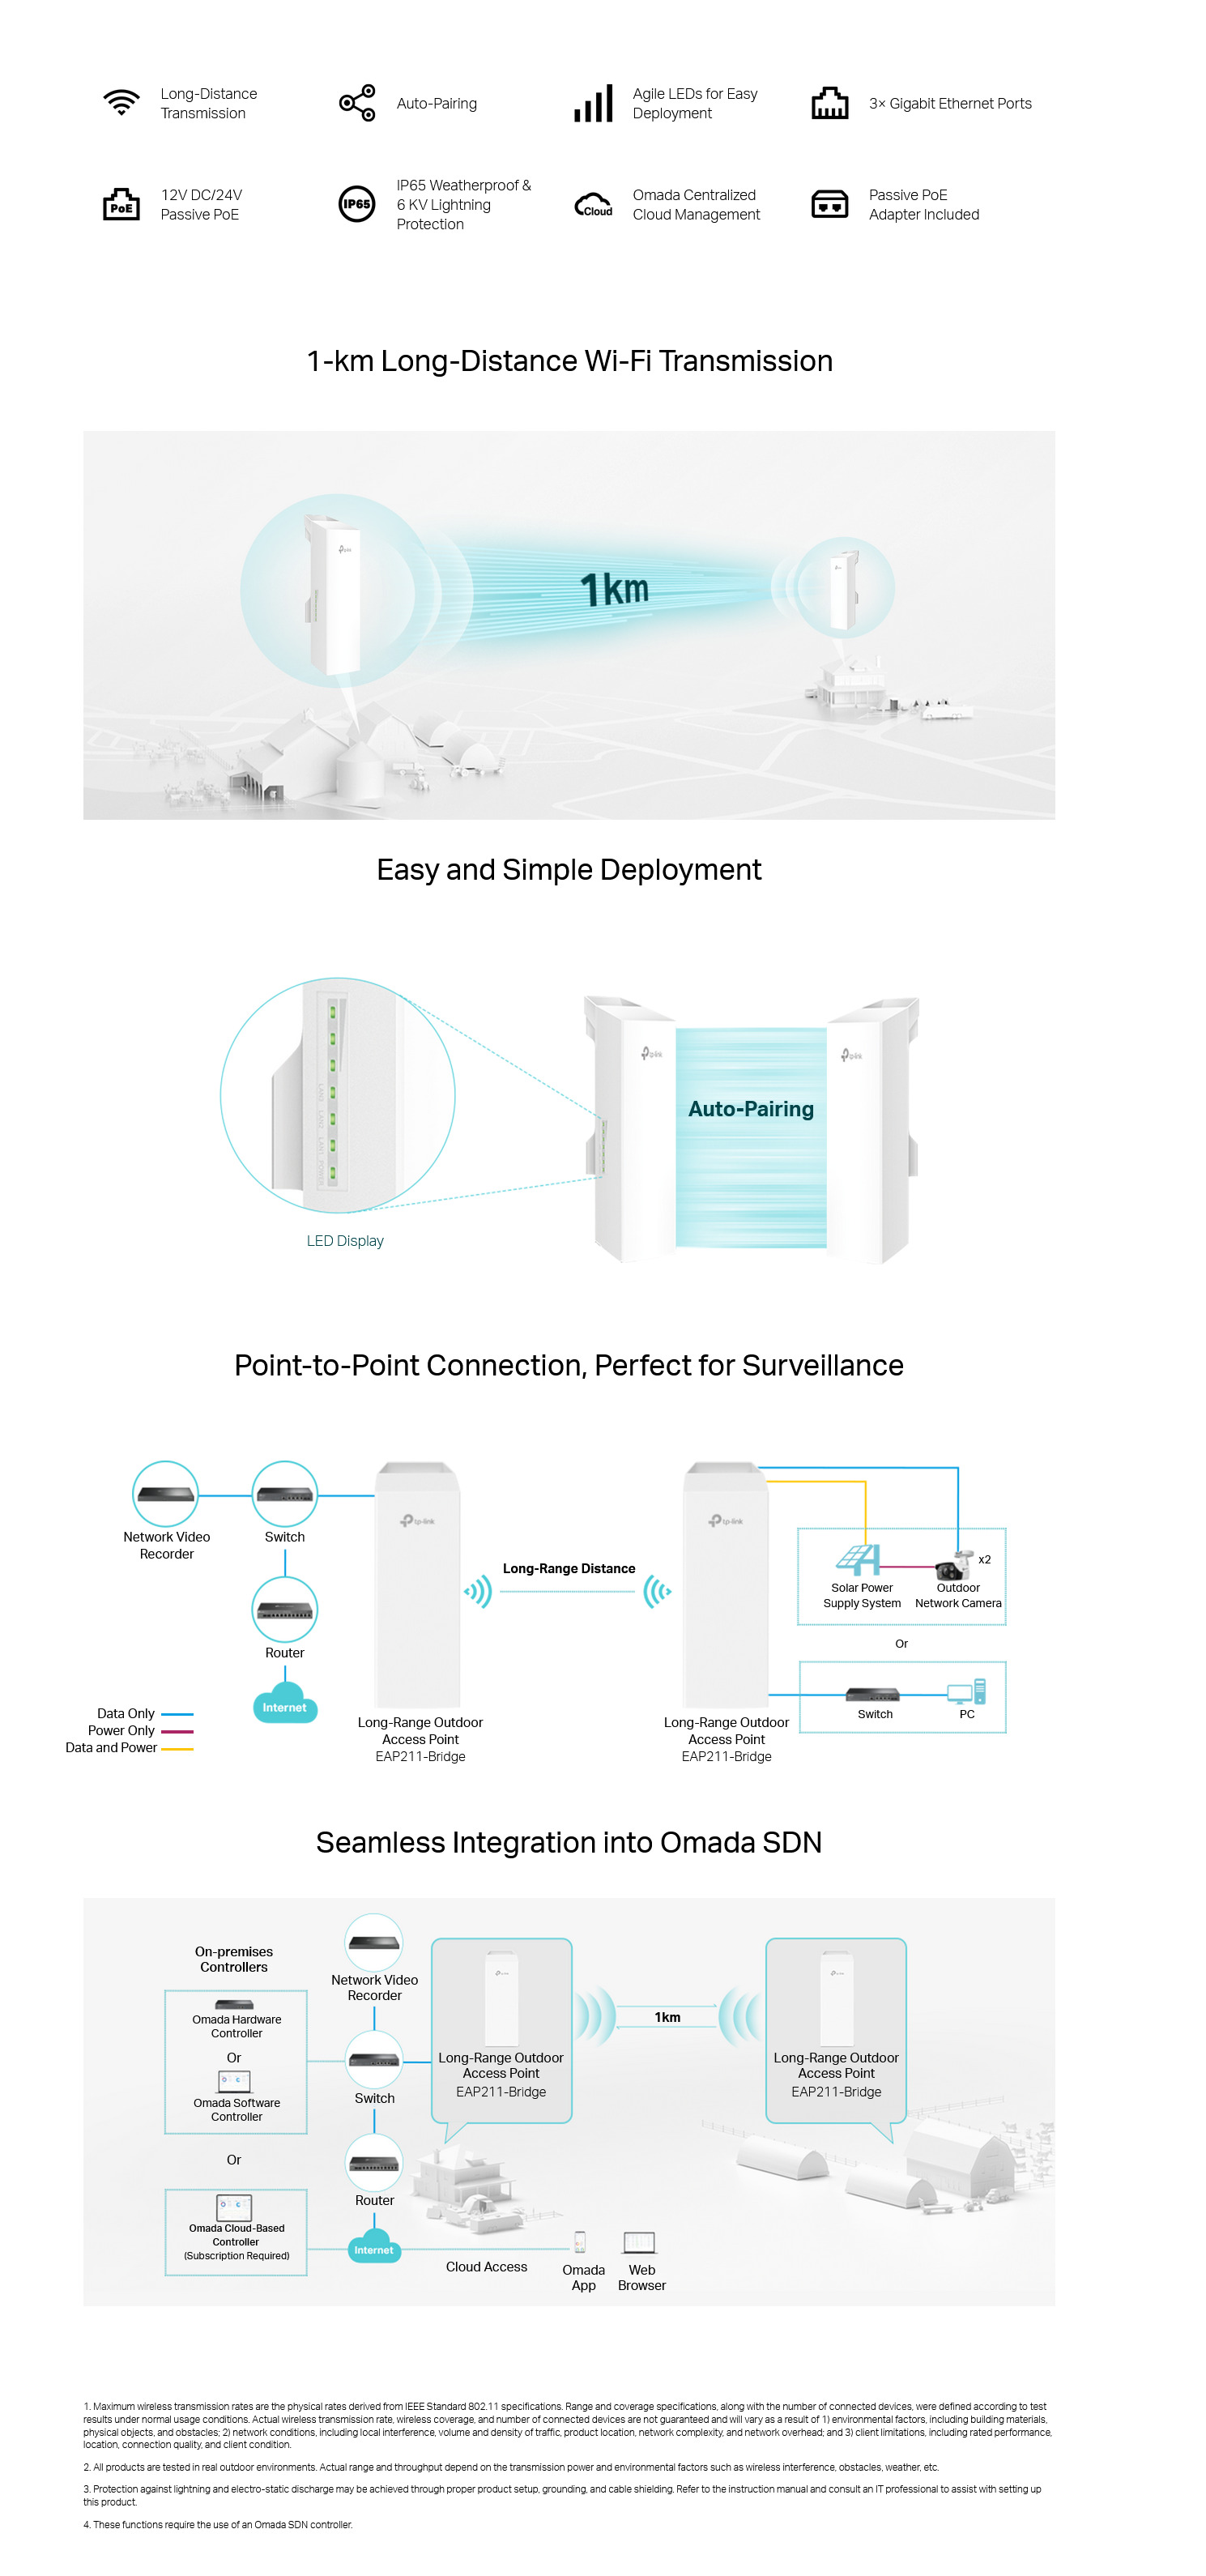 A large marketing image providing additional information about the product TP-Link Omada EAP211-Bridge KIT - 5GHz AC867 Indoor/Outdoor Access Point  - Additional alt info not provided